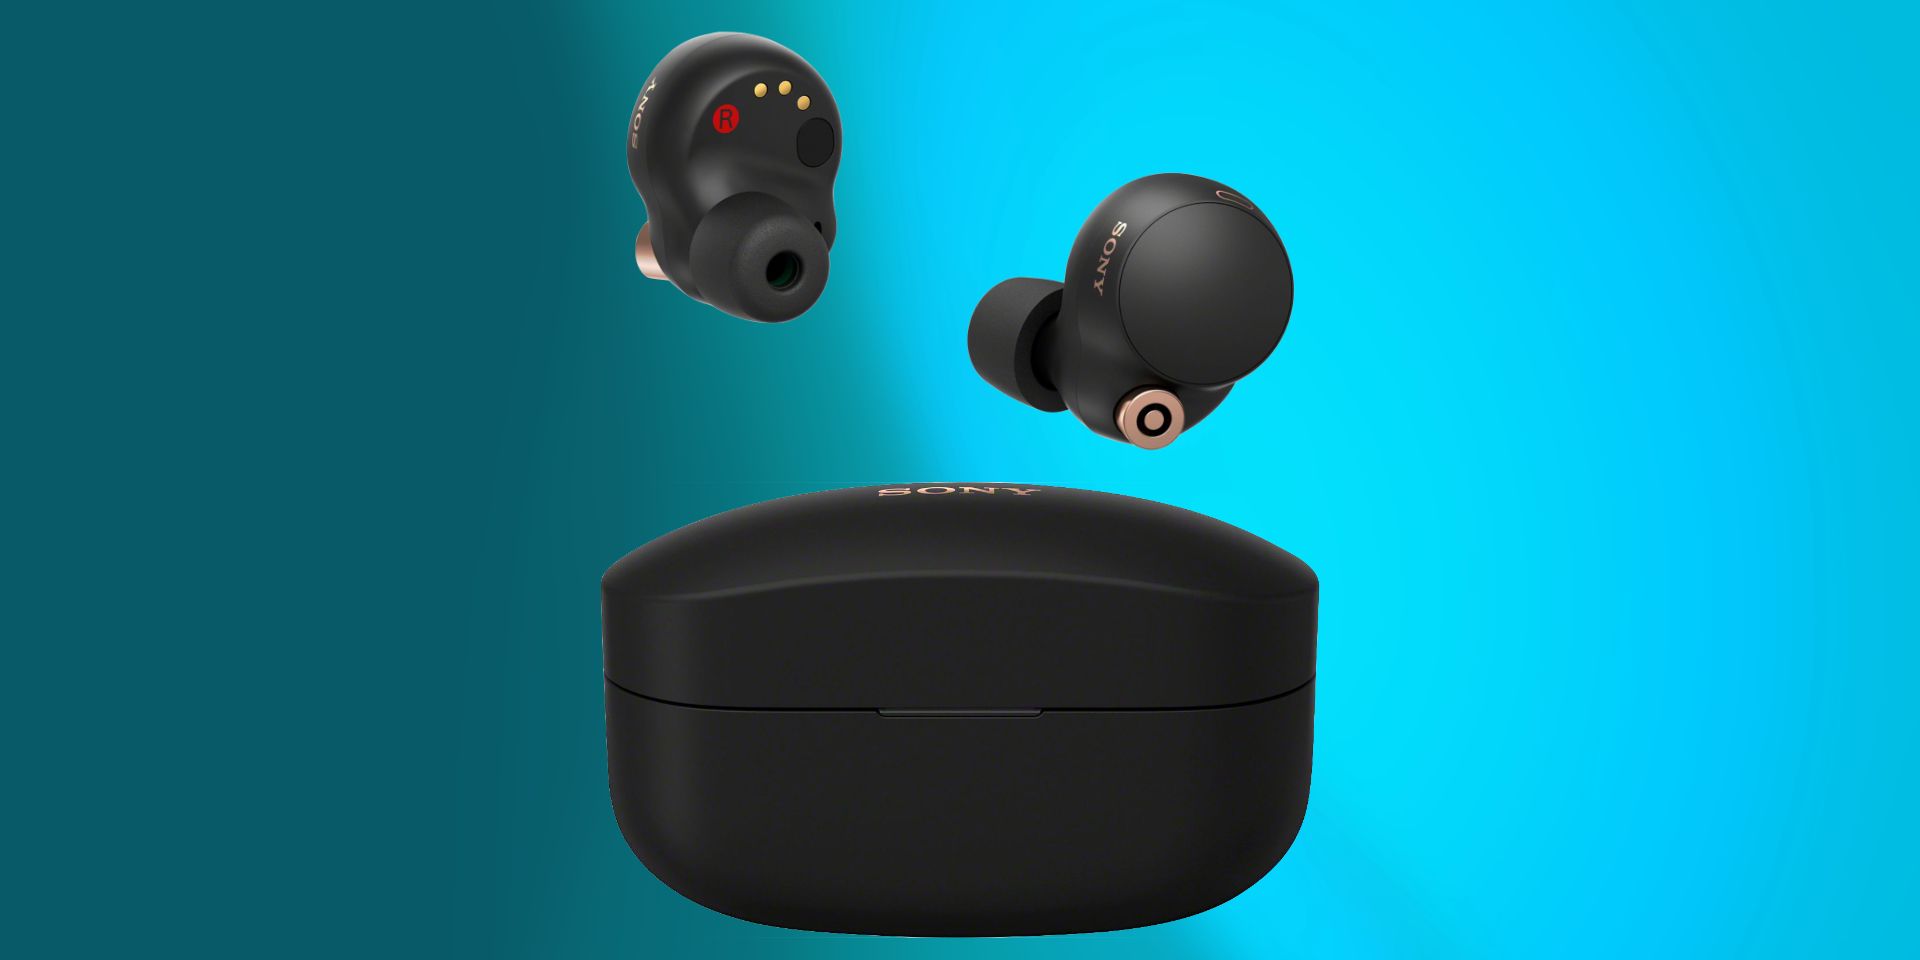 Renders of Sony WF-1000XM4 earbuds and case